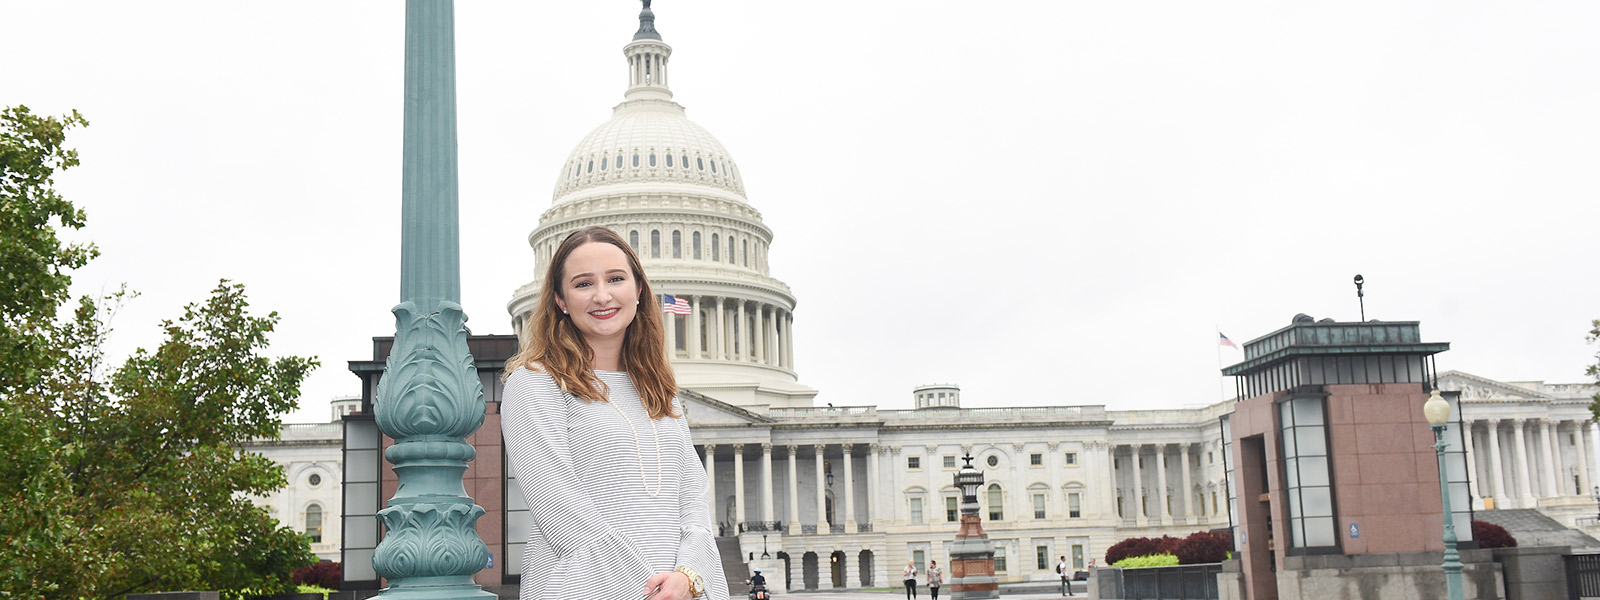 Politics student standing in front of the capitol building